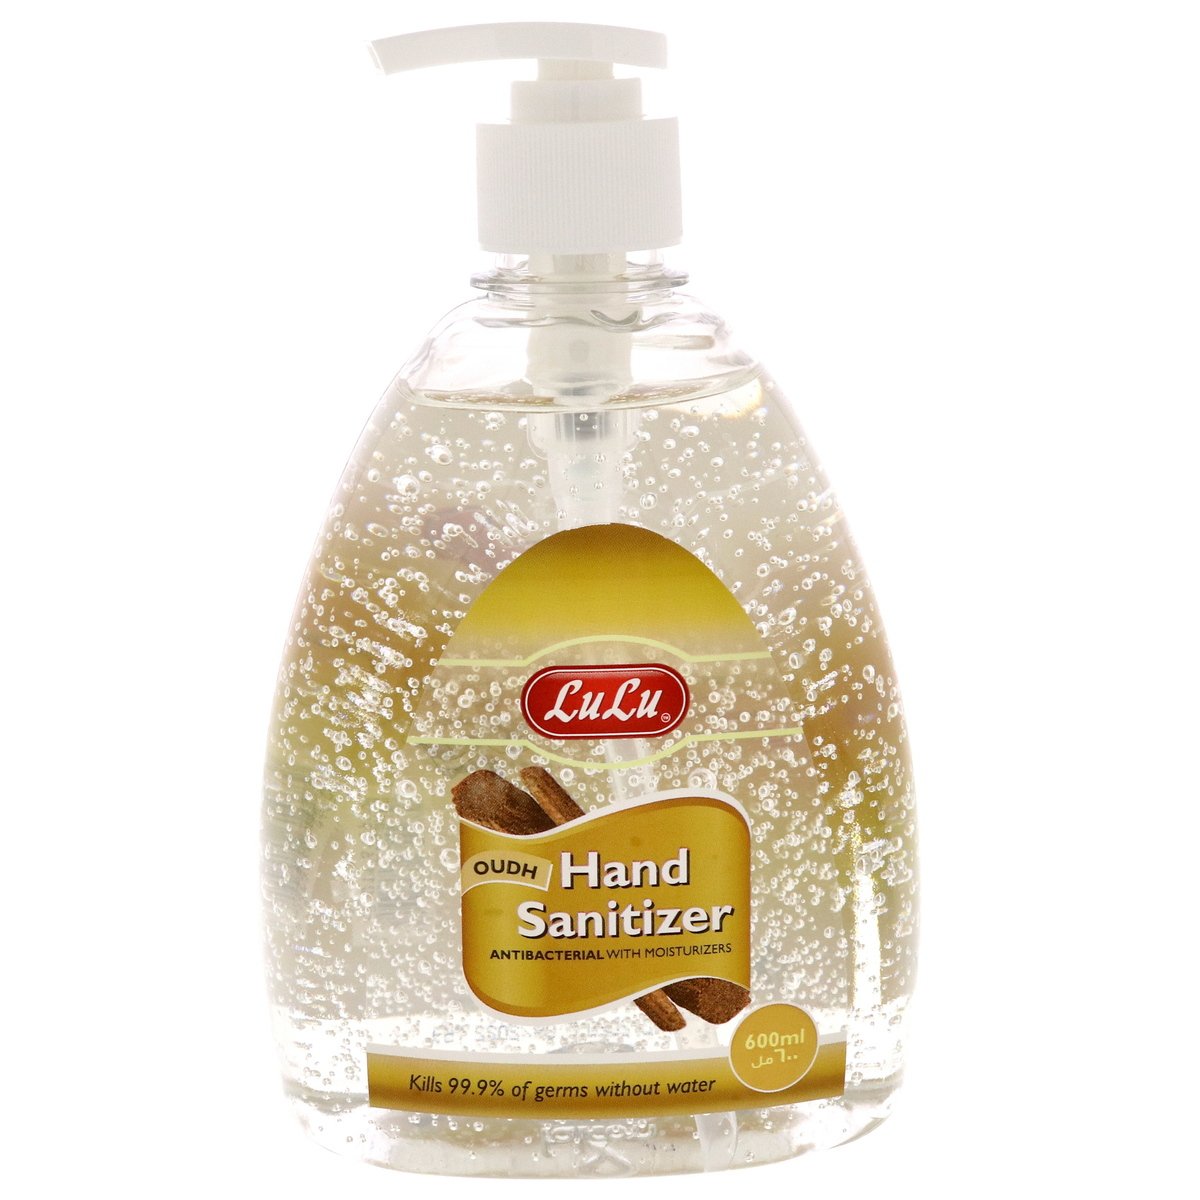 LuLu Oudh Hand Sanitizer Antibacterial with Moisturizers 600ml